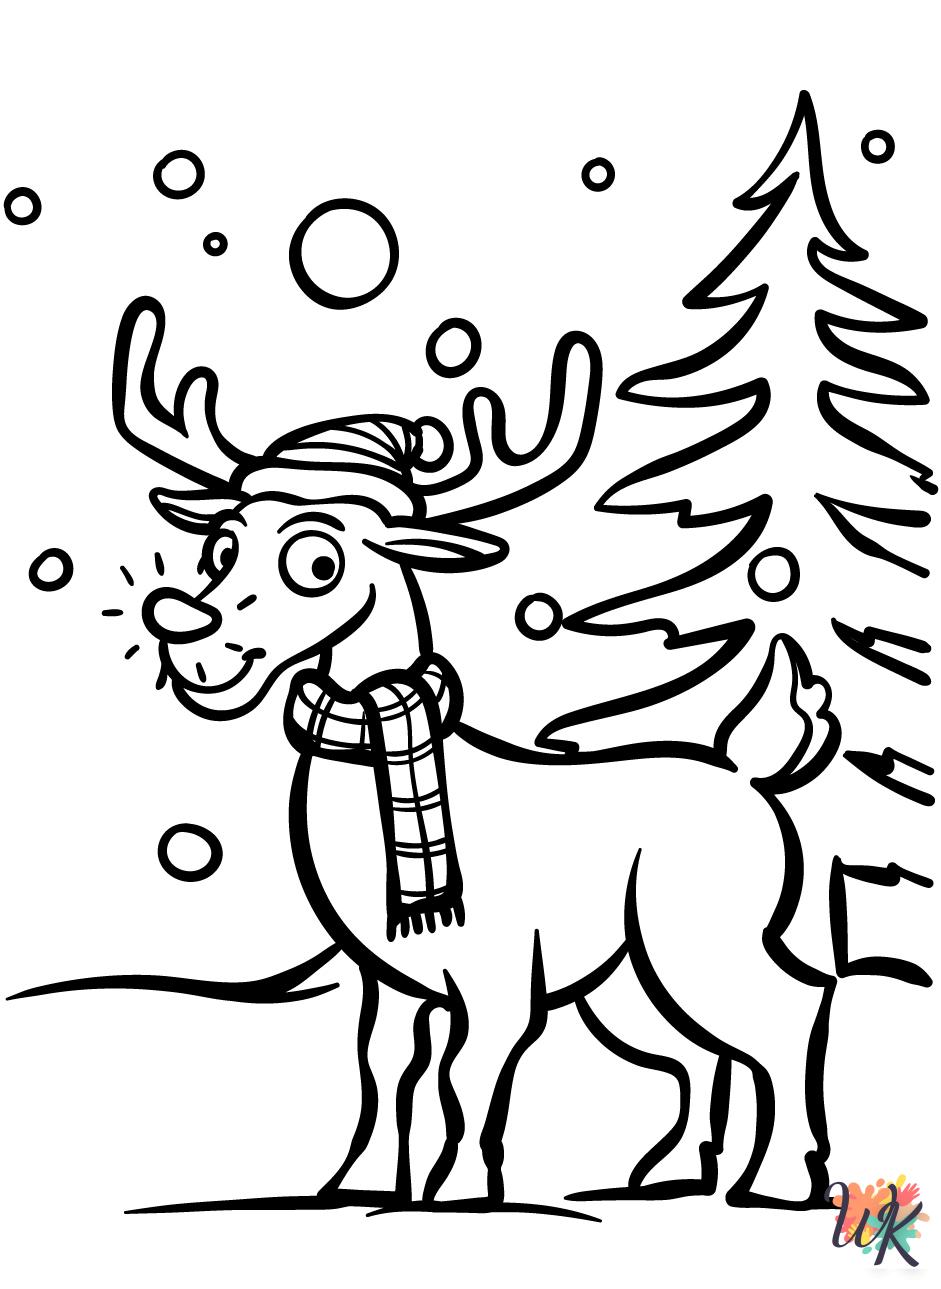 Rudolph coloring pages easy